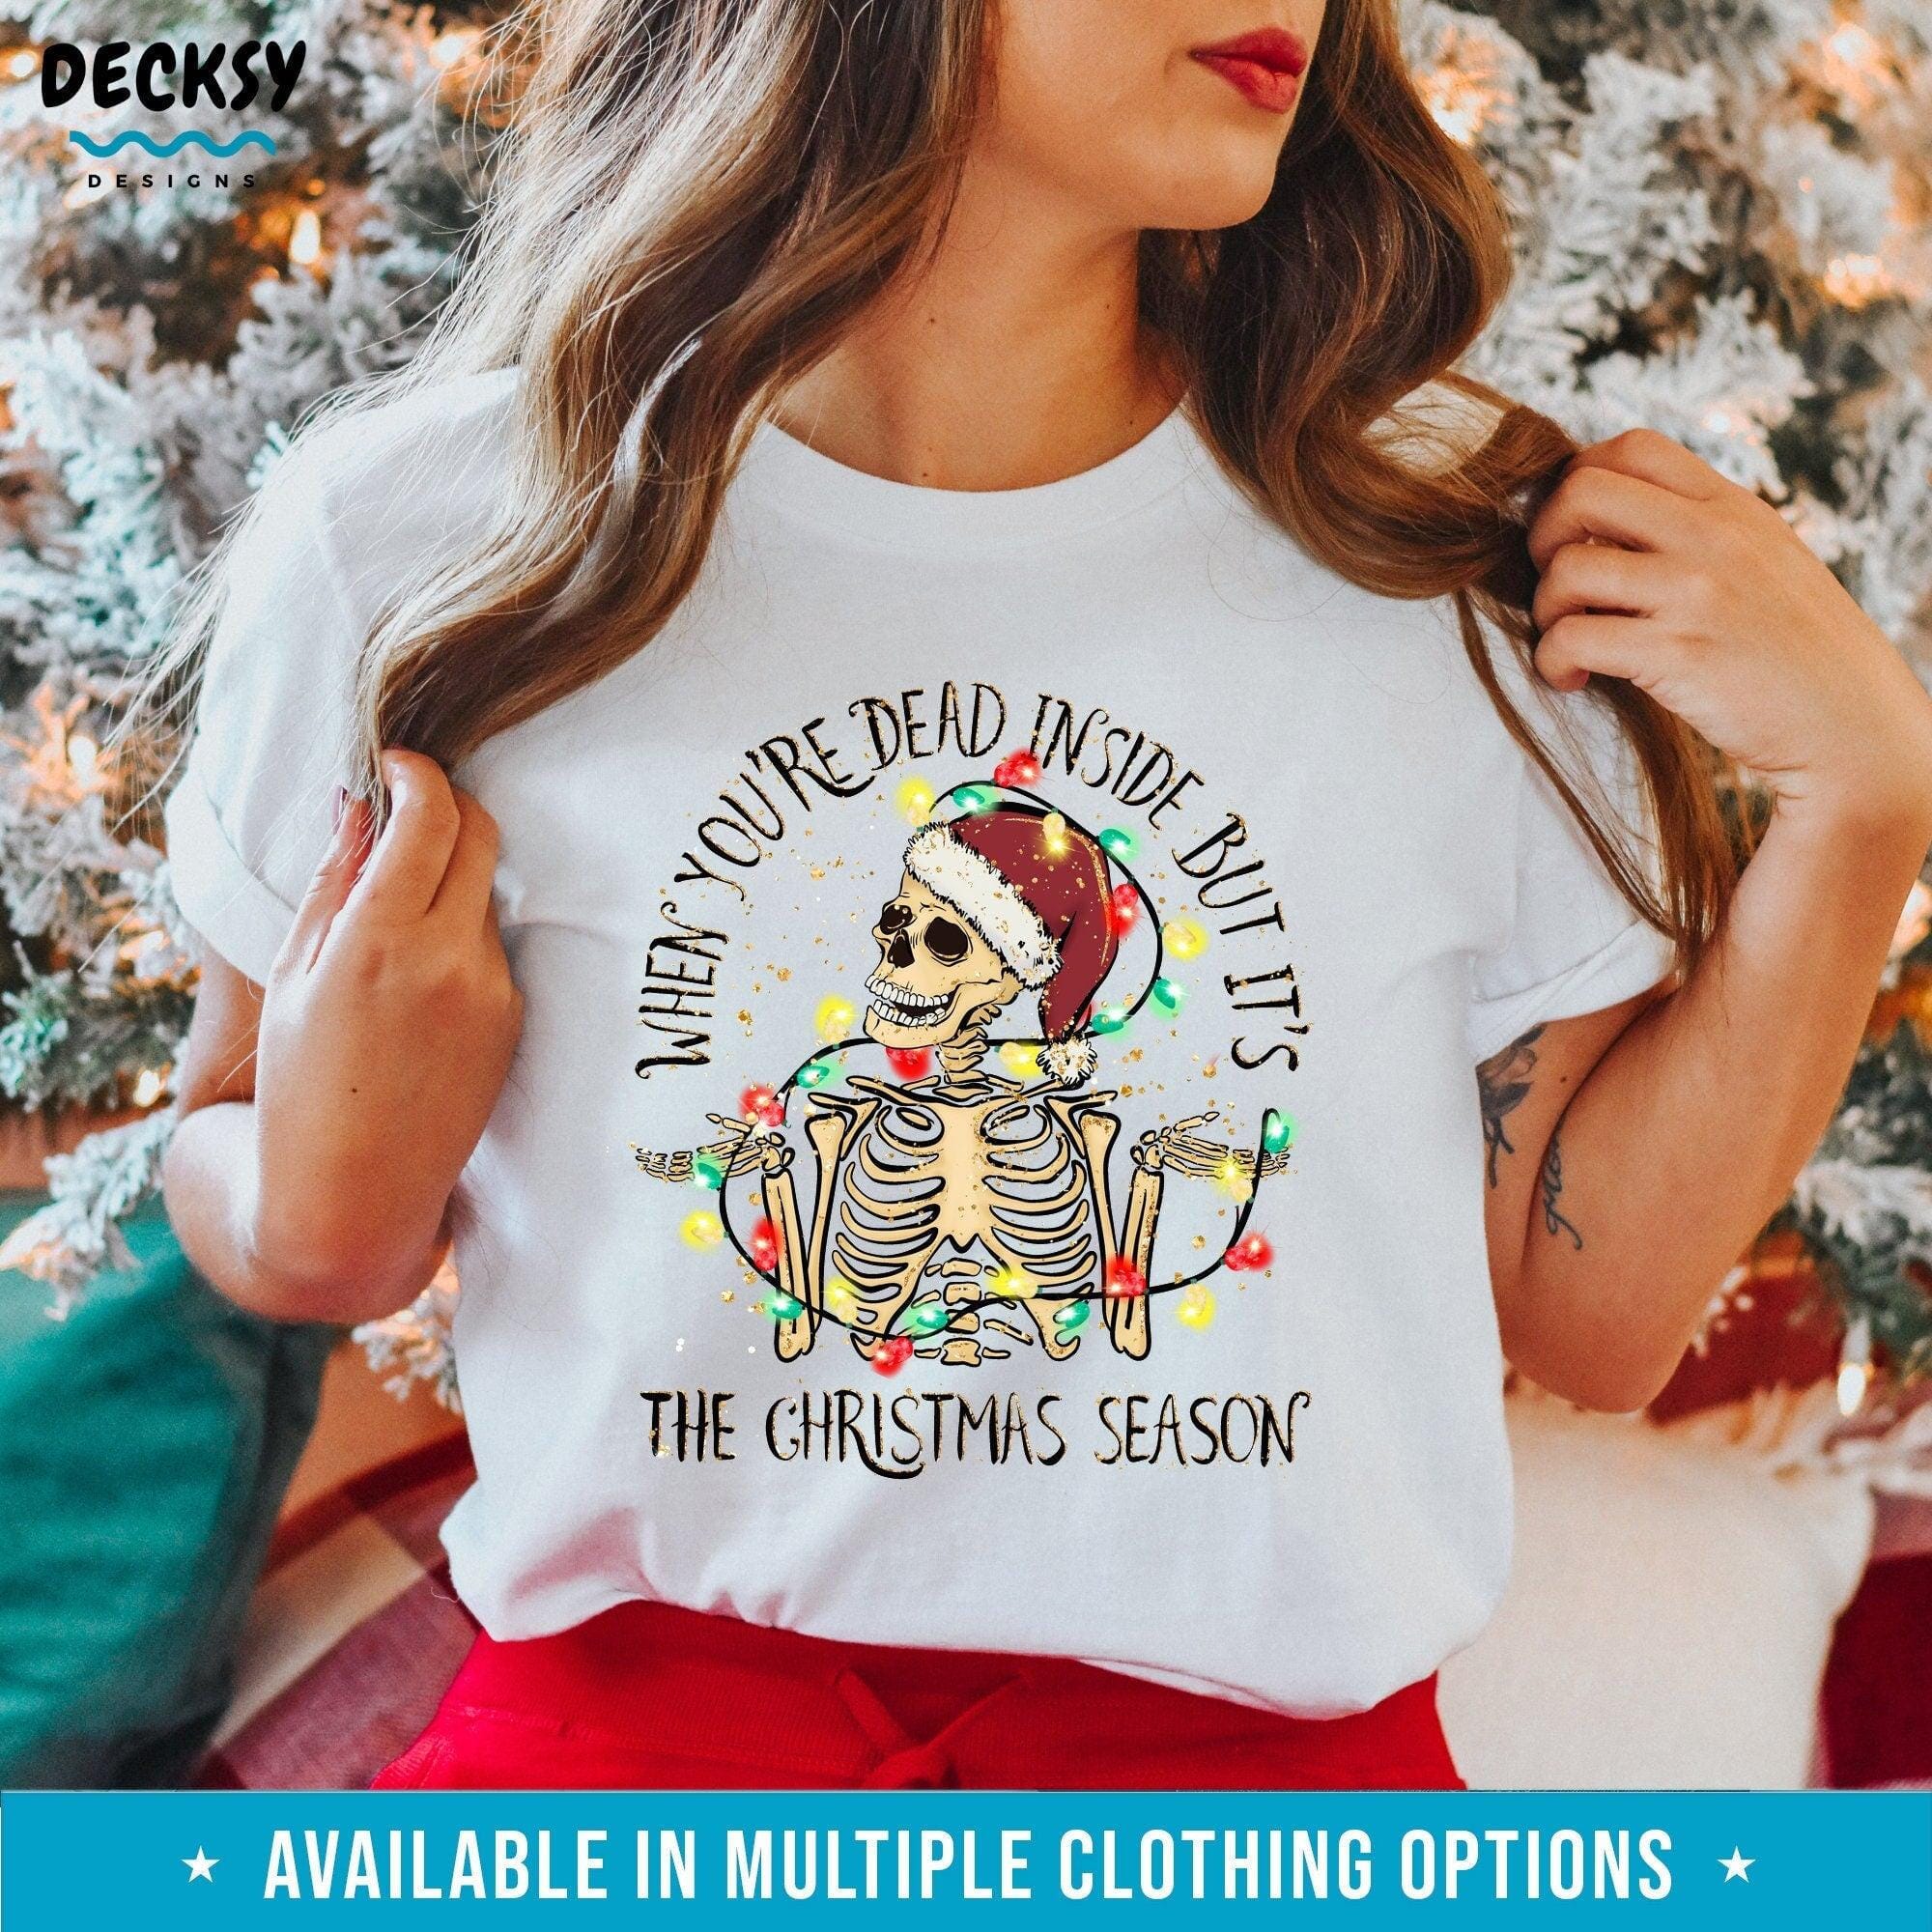 Christmas Shirt, Skeleton Christmas Gift-Clothing:Gender-Neutral Adult Clothing:Tops & Tees:T-shirts:Graphic Tees-DecksyDesigns